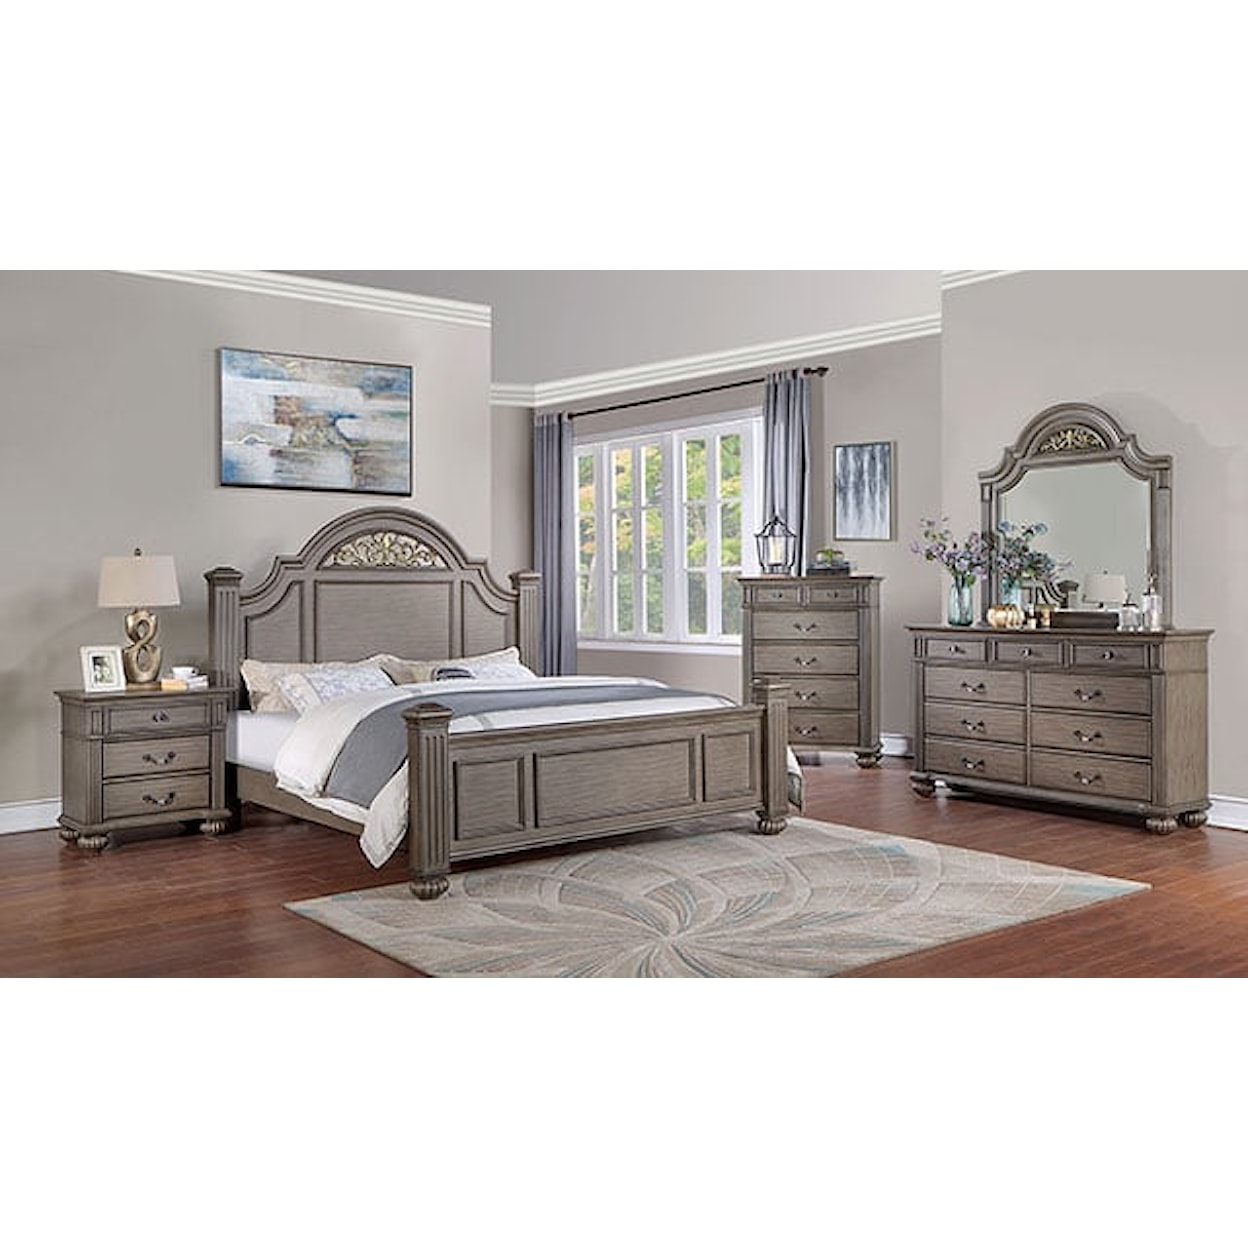 Furniture of America Syracuse King Bed